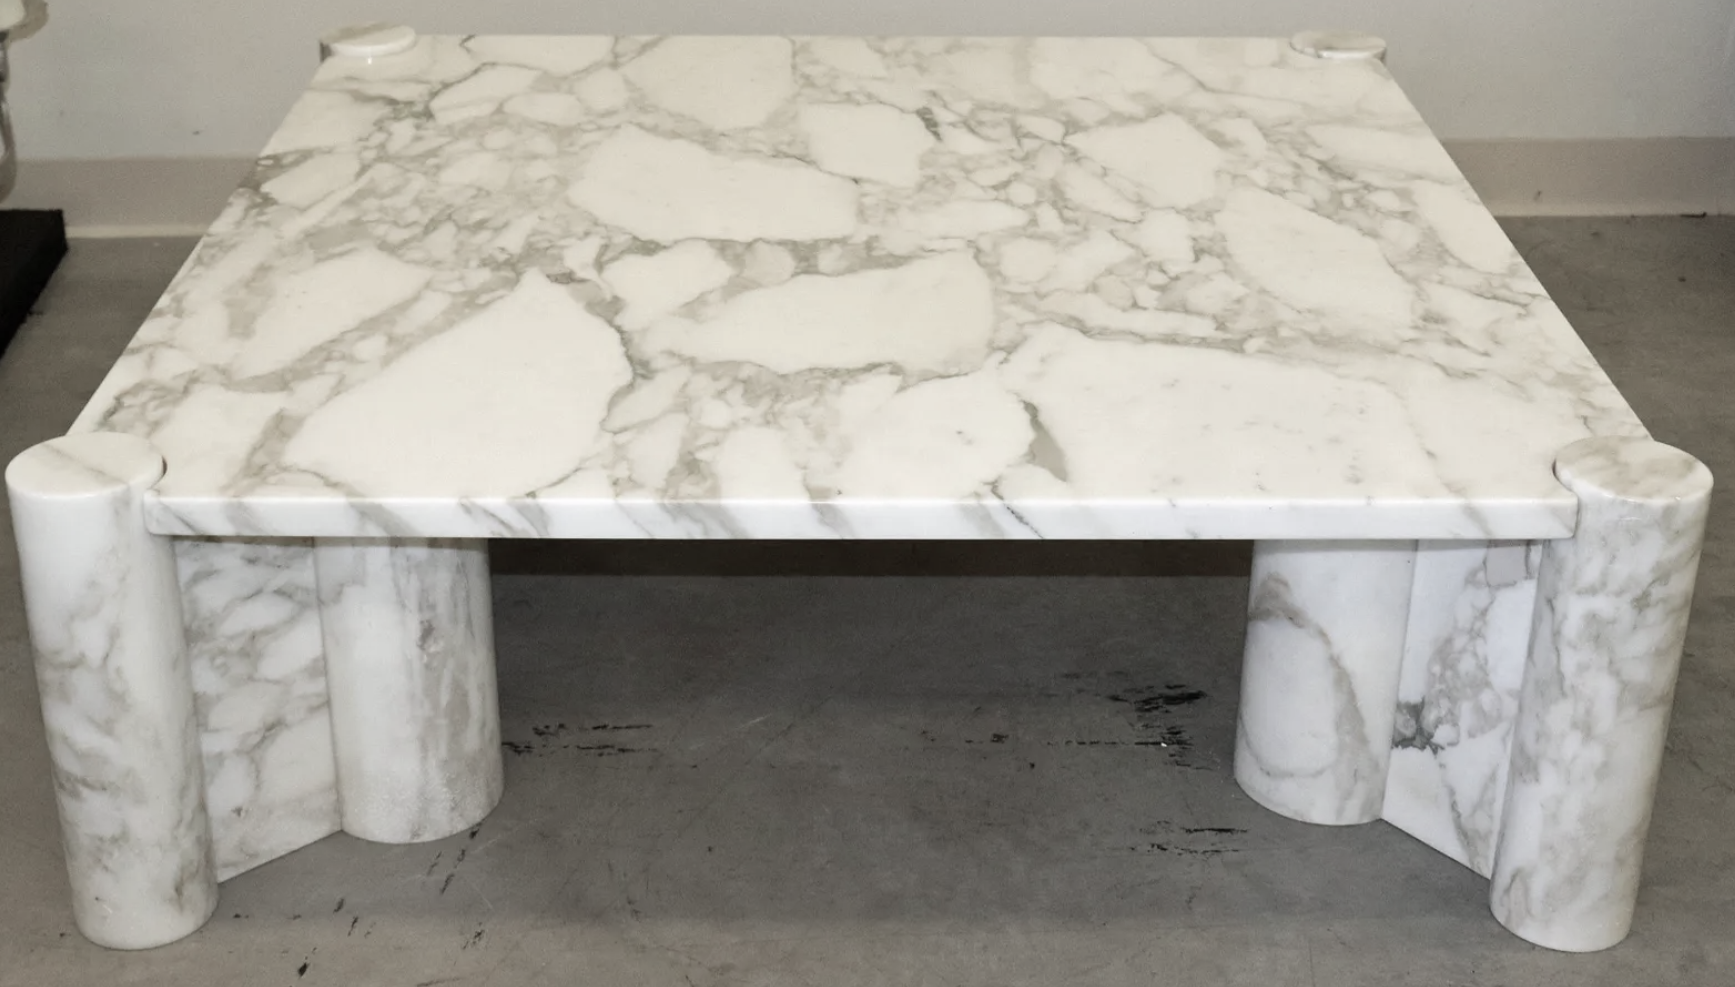 A Gae Aulenti Jumbo marble coffee table for Knoll achieved $13,000 plus the buyer’s premium in April 2022. Image courtesy of Vero Beach Auction and LiveAuctioneers.